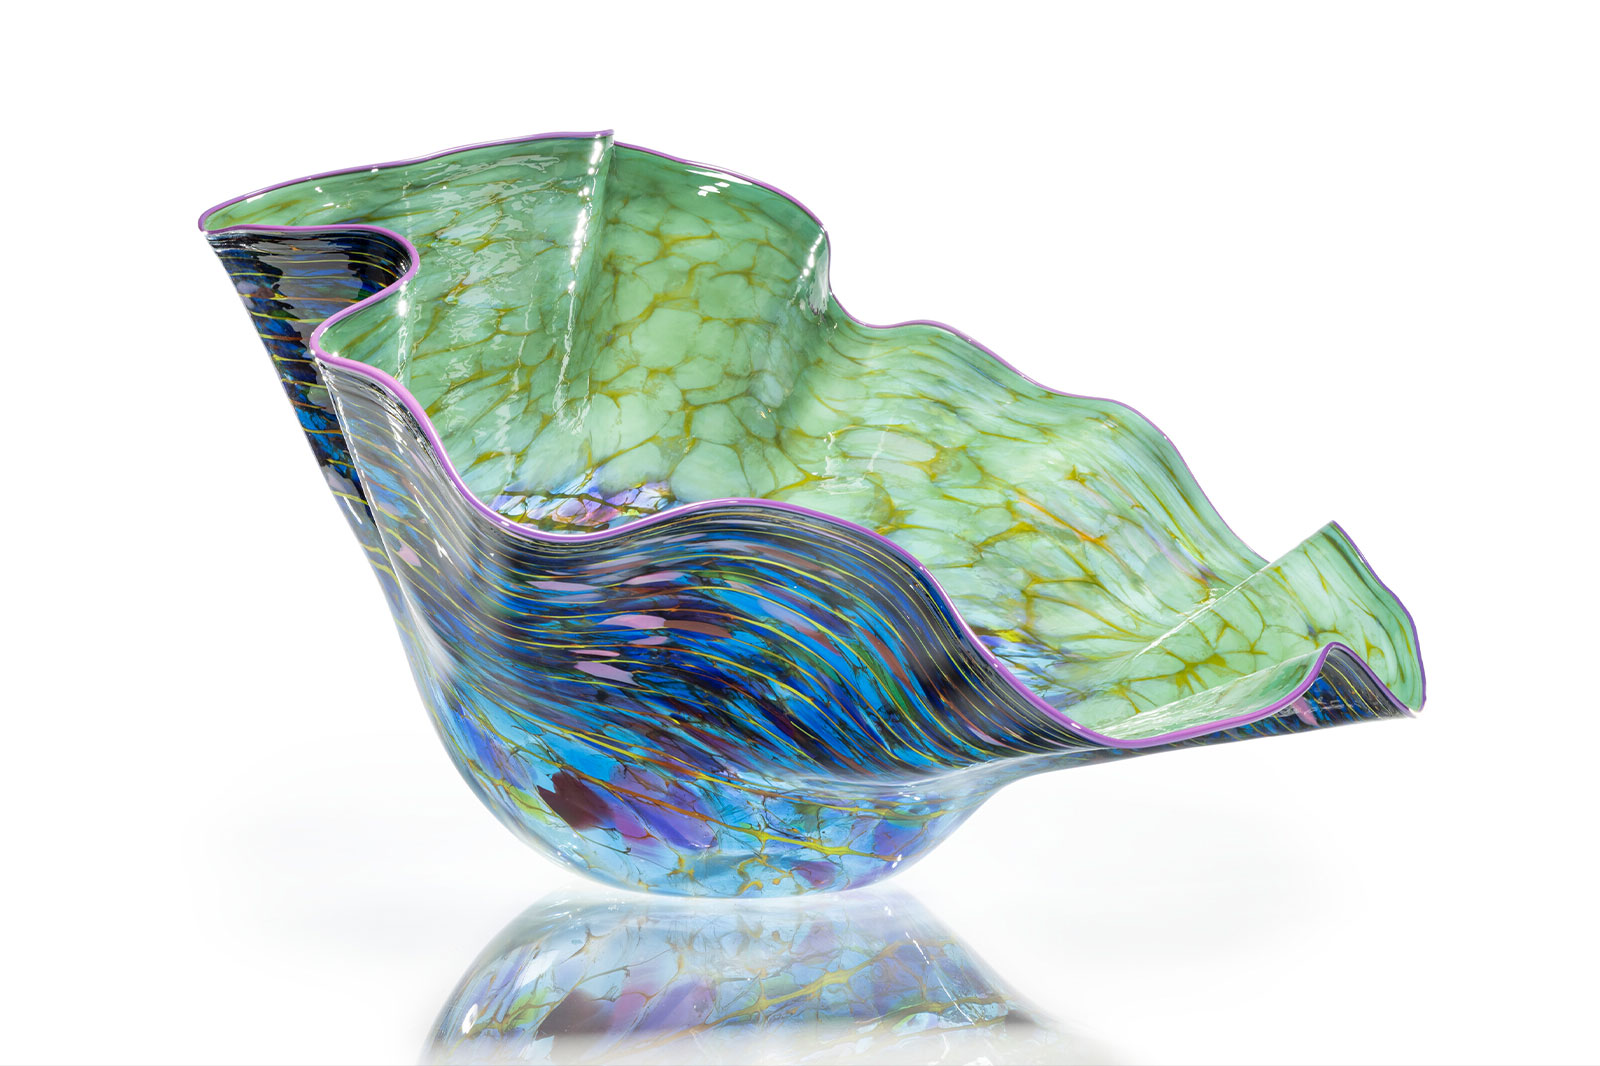 Shale Green Macchia with Lavender Lip Wrap, 2007 by Dale Chihuly